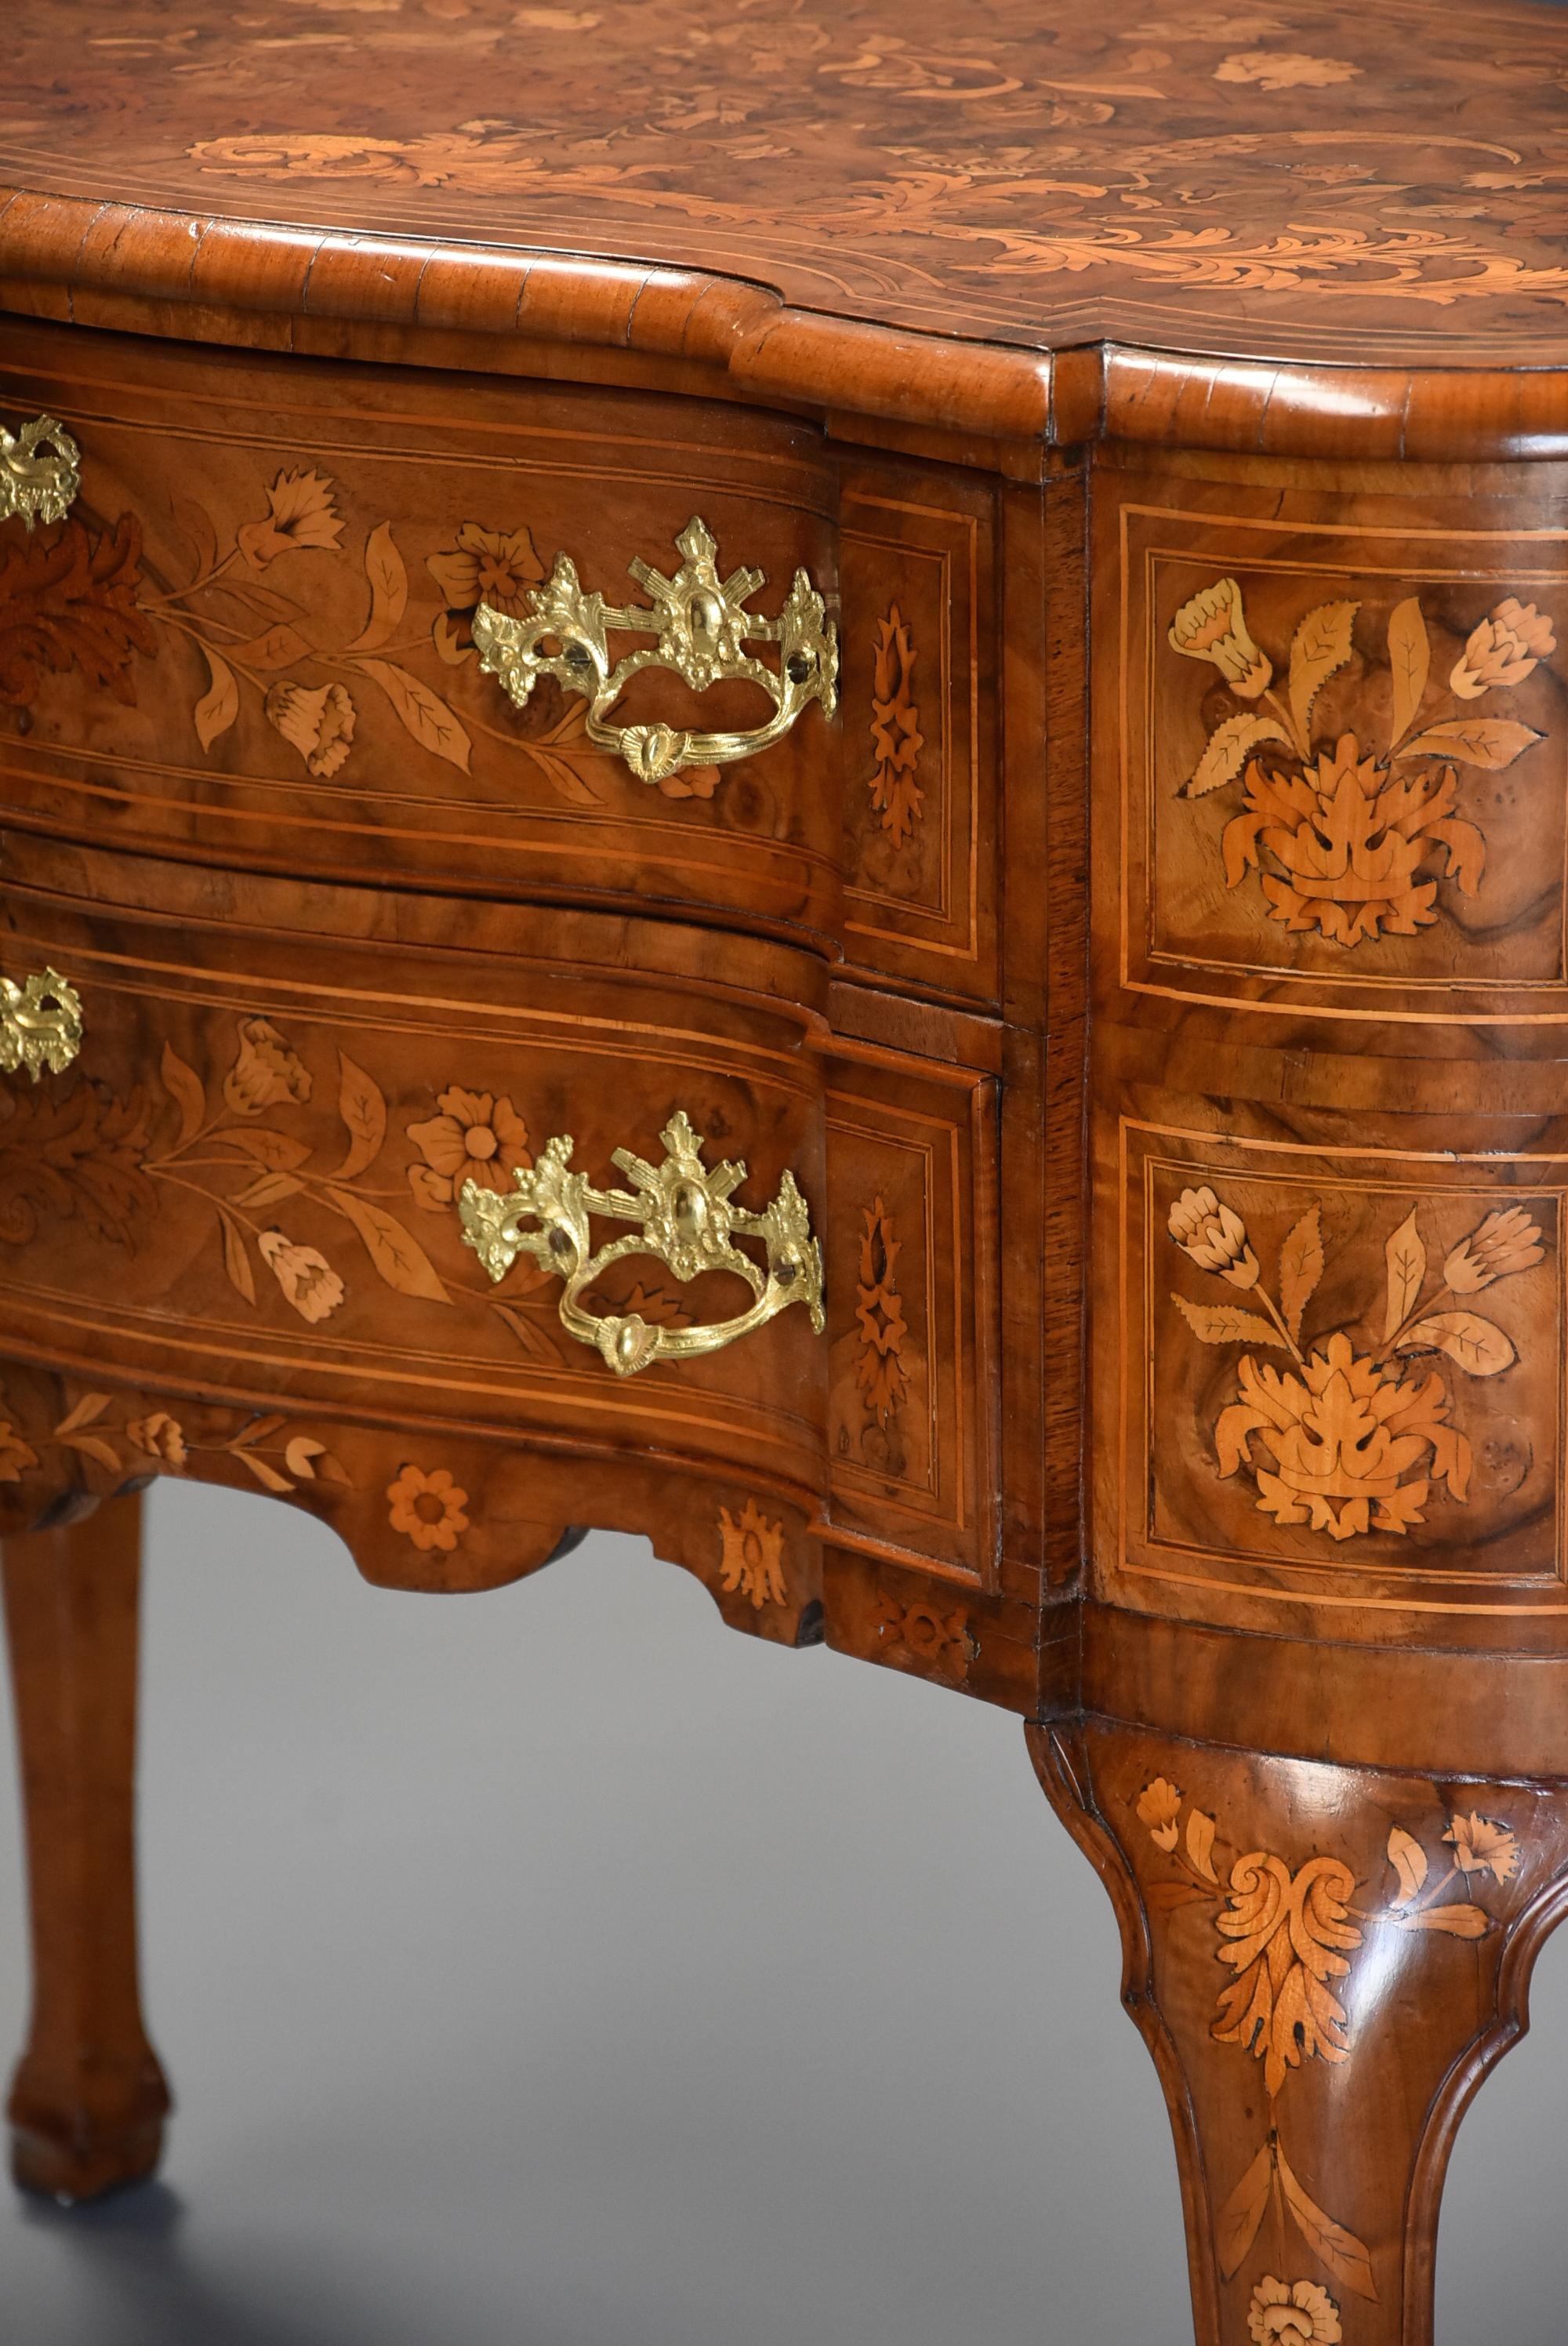 Fine Quality Mid-19th Century Floral Marquetry Walnut Lowboy of Serpentine Form For Sale 6